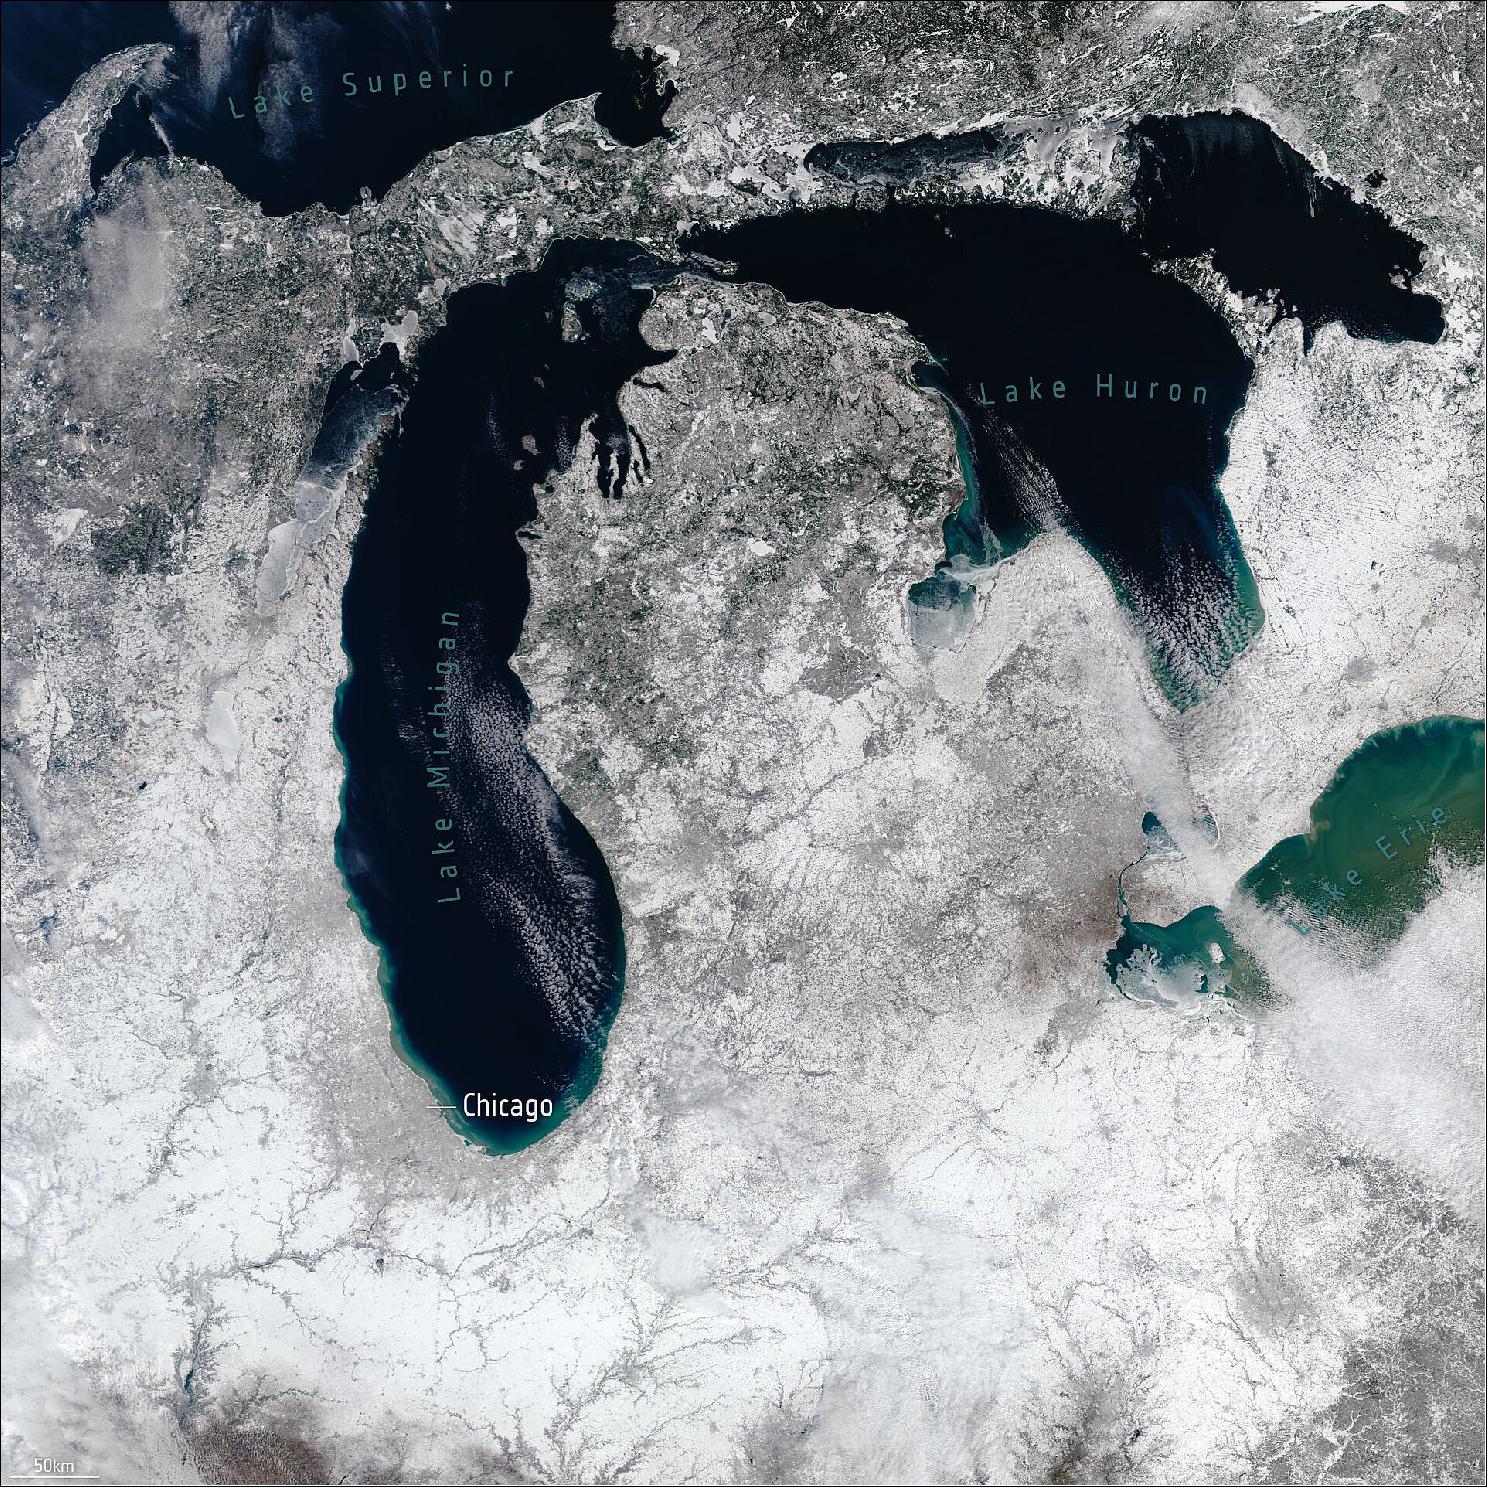 Figure 19: This image of snow in the Great Lakes region in the US was captured by the Copernicus Sentinel-3 mission's ocean and land color instrument on 3 February 2021. While there are reports of record-low ice cover on the lakes this year, there has, nevertheless, been heavy snowfall across the Midwest and Great Lakes over the last few days. Snow has also hit the northeast US. It is thought that this winter's polar vortex is currently sending extreme icy blasts of Arctic weather to some parts of the northern hemisphere. Scientists are using wind information from ESA's Aeolus satellite to shed more light on the complex polar vortex phenomenon (image credit: ESA, the image contains modified Copernicus Sentinel data (2021), processed by ESA, CC BY-SA 3.0 IGO)